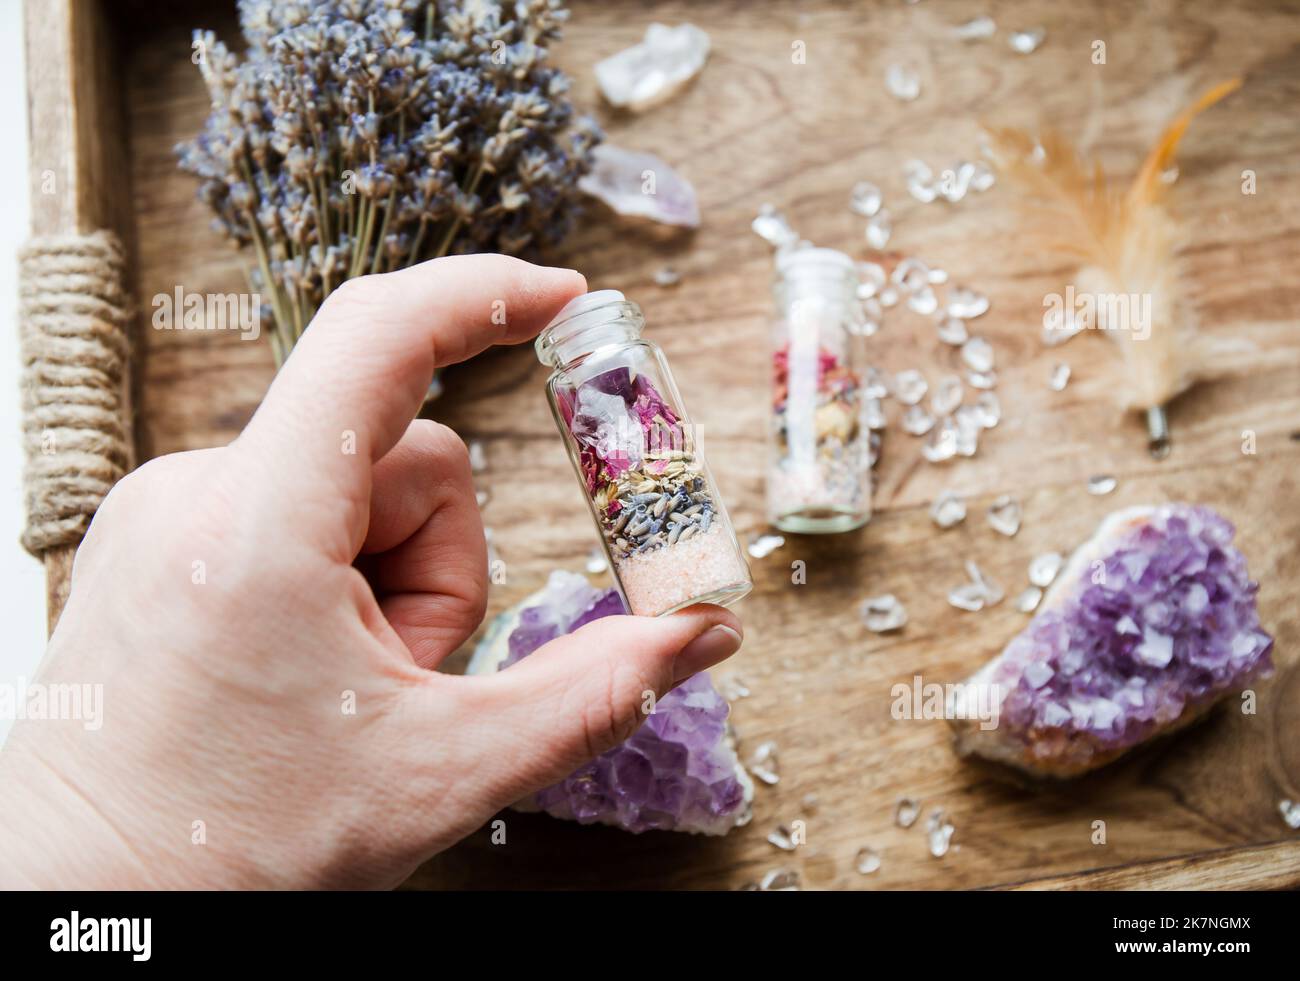 Woman hand holding homemade spell jar bottle with good intentions for home protection and inner balance. Filled with Himalayan salt, dried herbs. Stock Photo